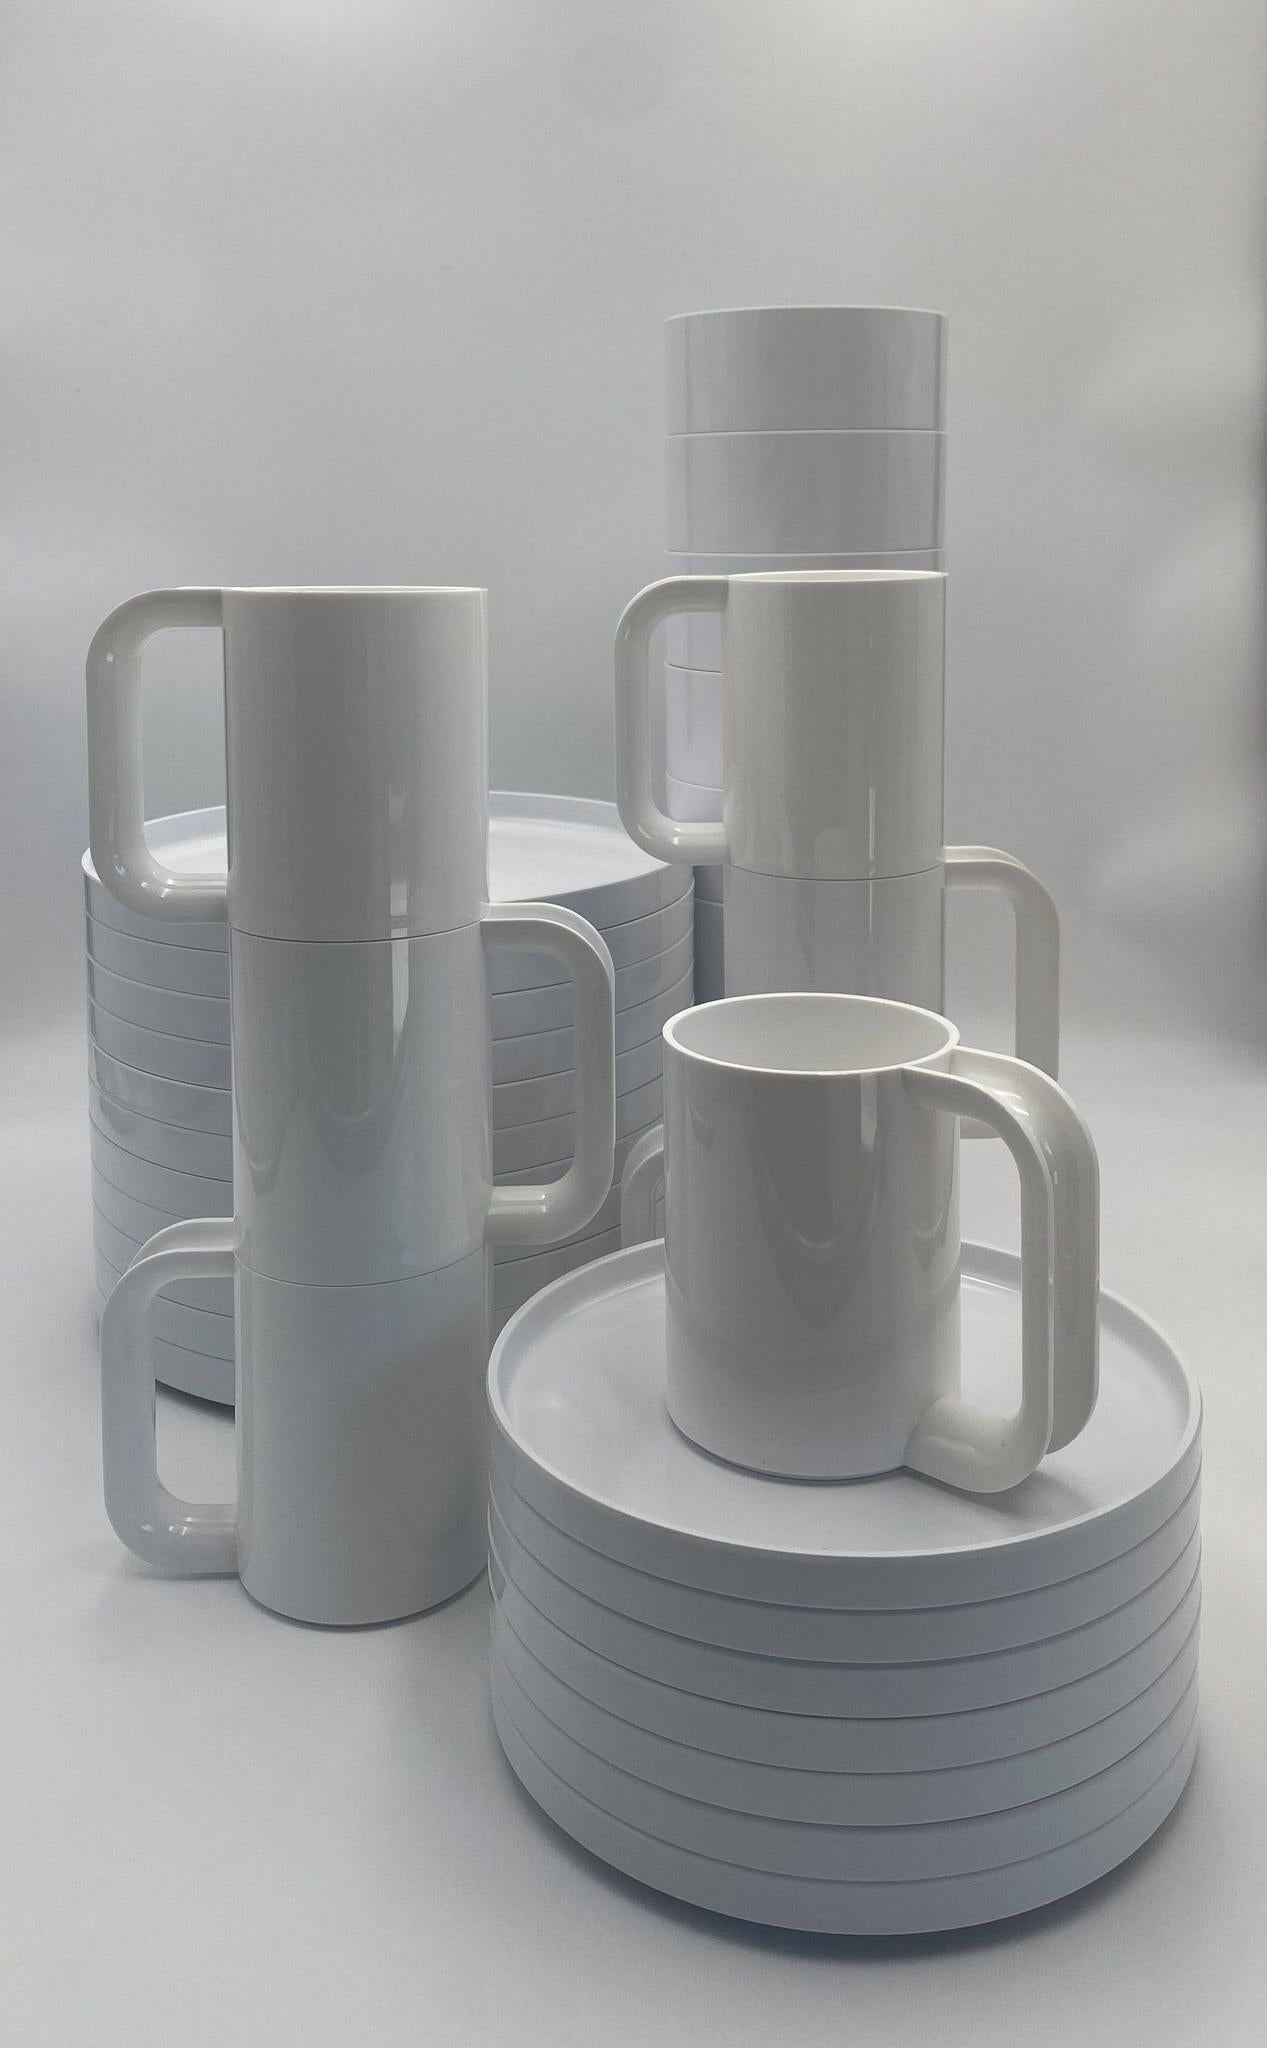 Massimo Vignelli Stackable Dinnerware for Heller ( 33 pieces ), USA, c.1980. 

7 Cups / Each Measures: 4.63